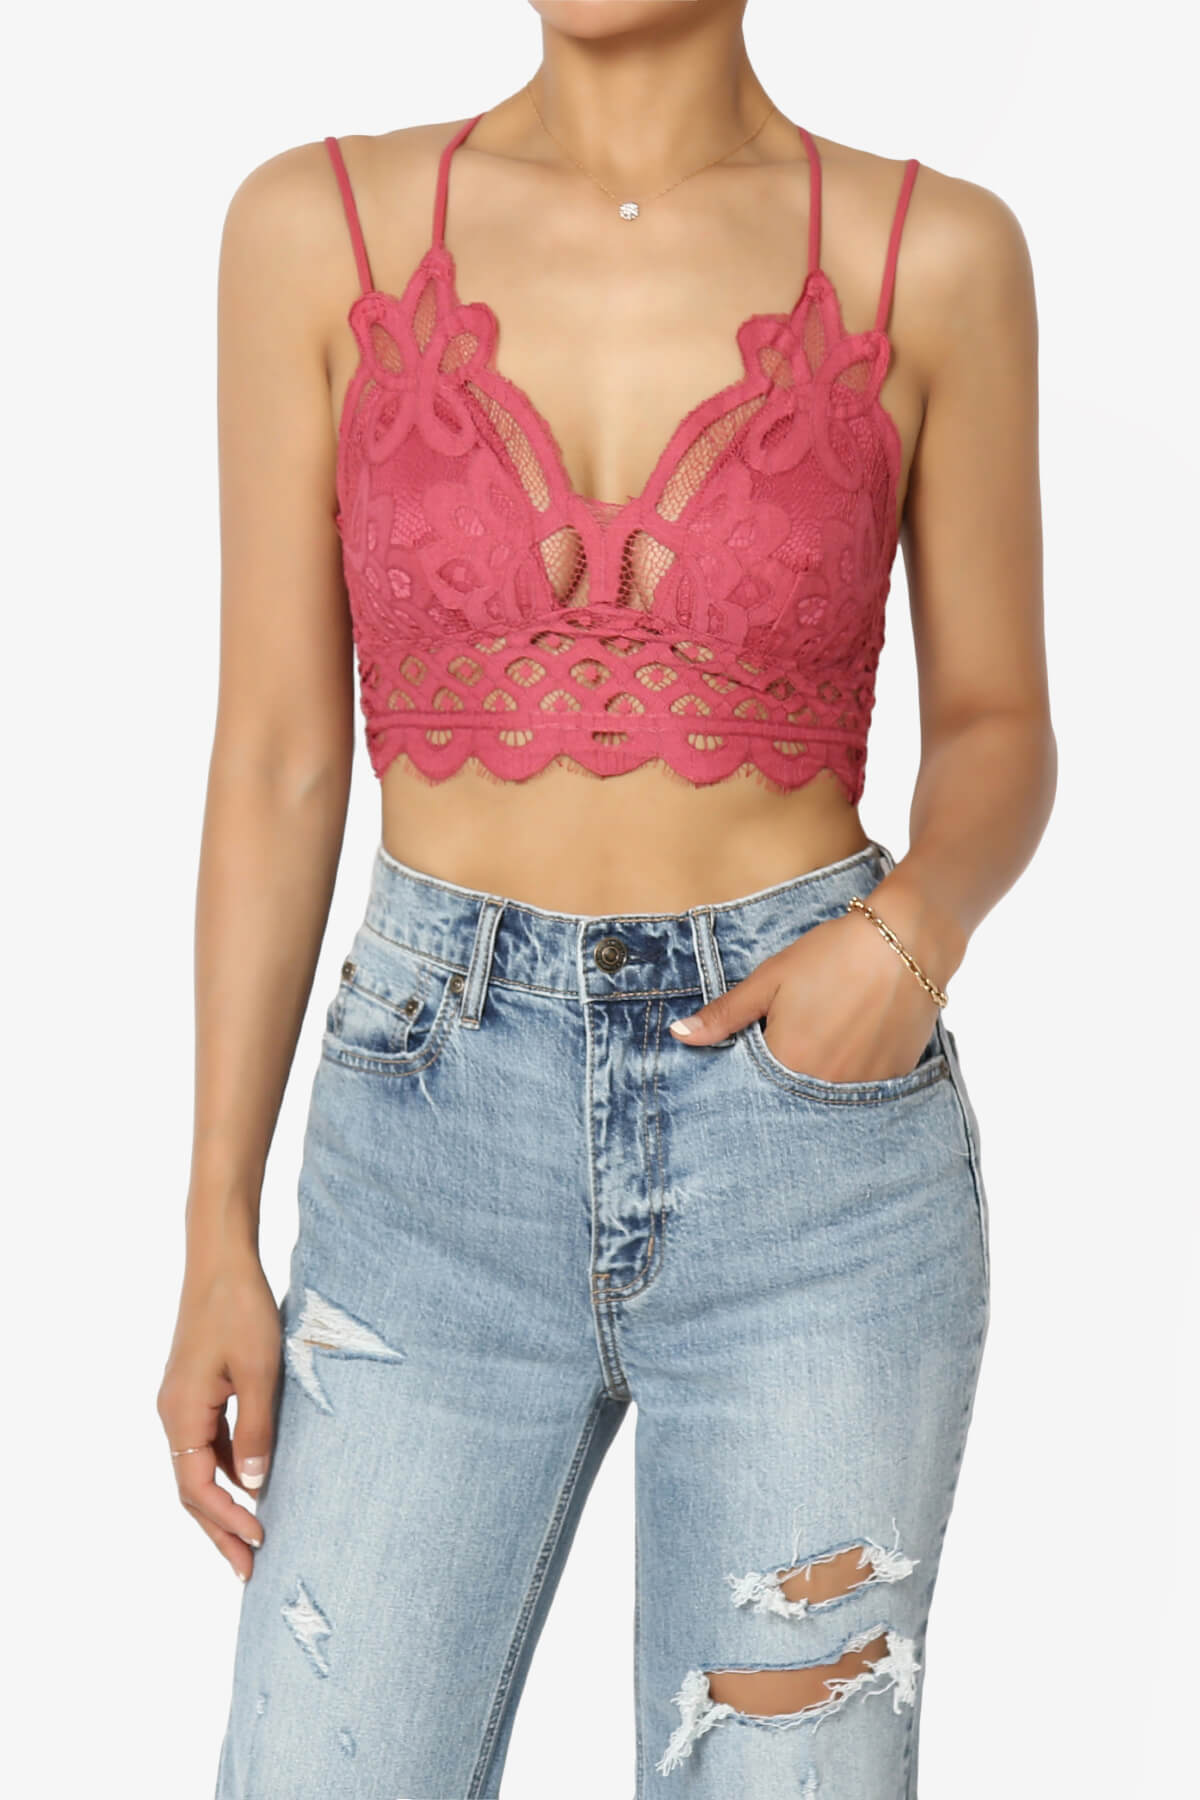 Load image into Gallery viewer, Adella Crochet Lace Bralette ROSE_1
